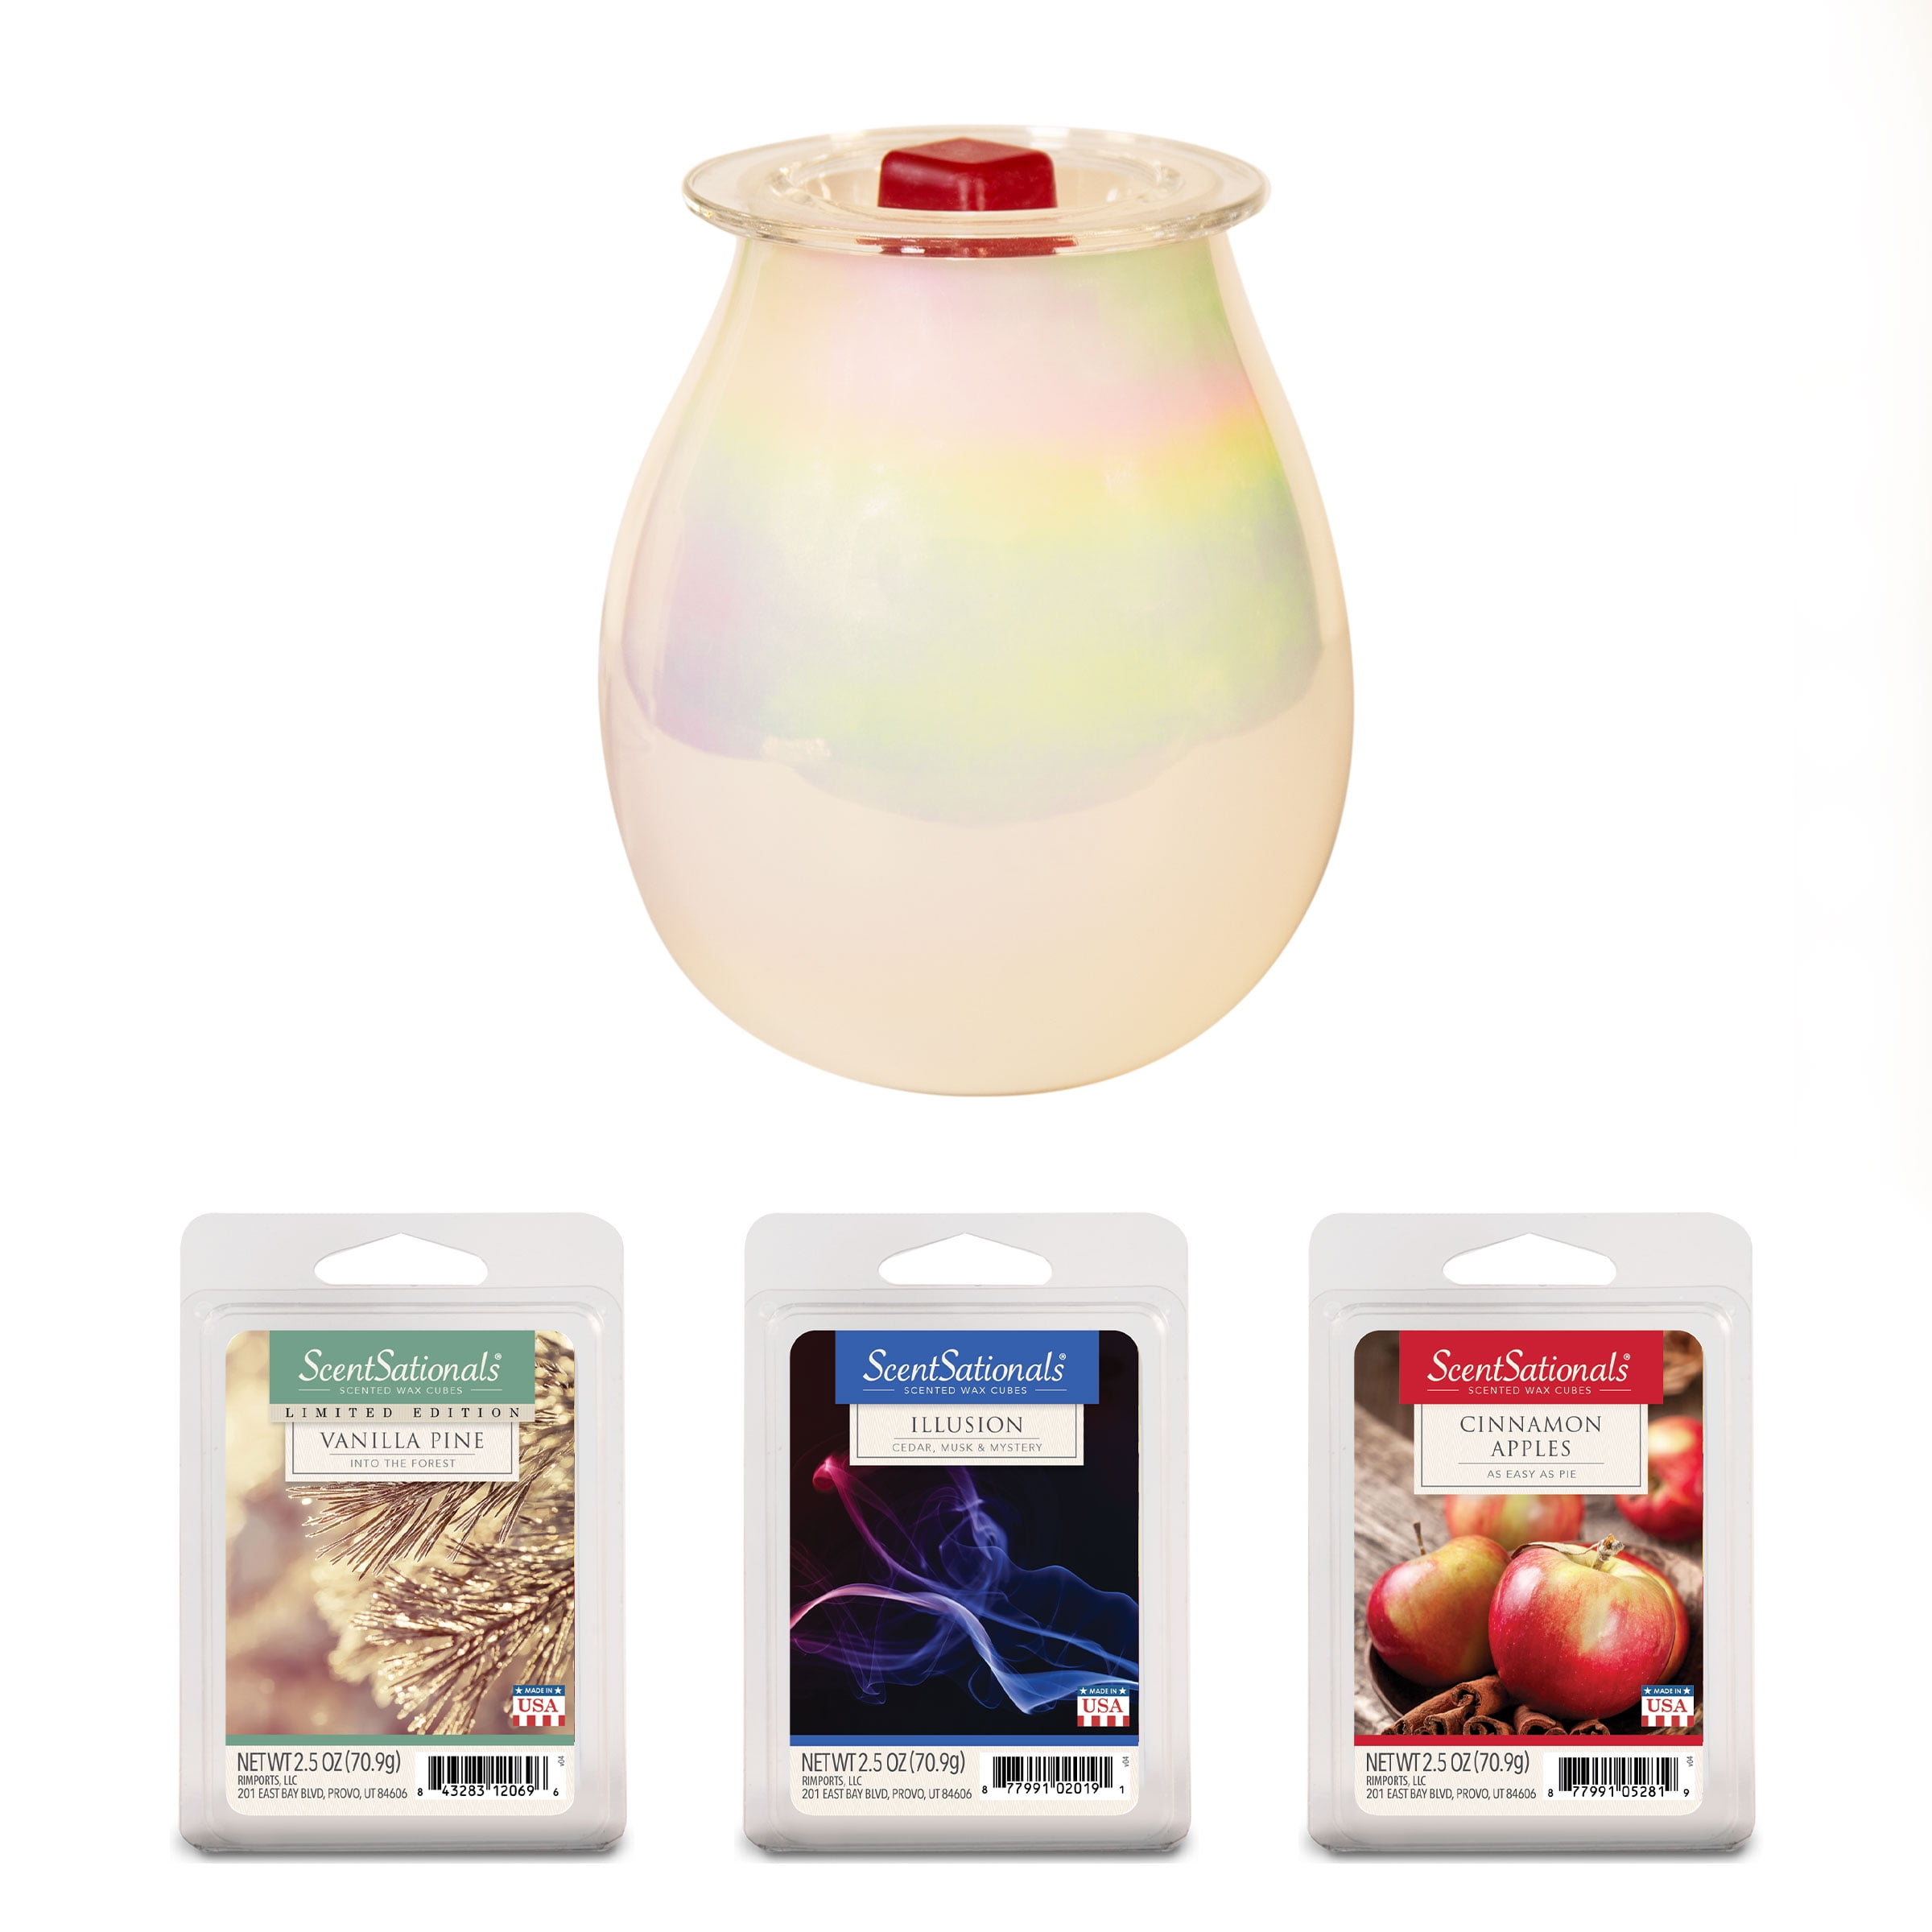 NIB - Sonoma Scented Wax Warmer, Electric w/ 4 Wax Scents included